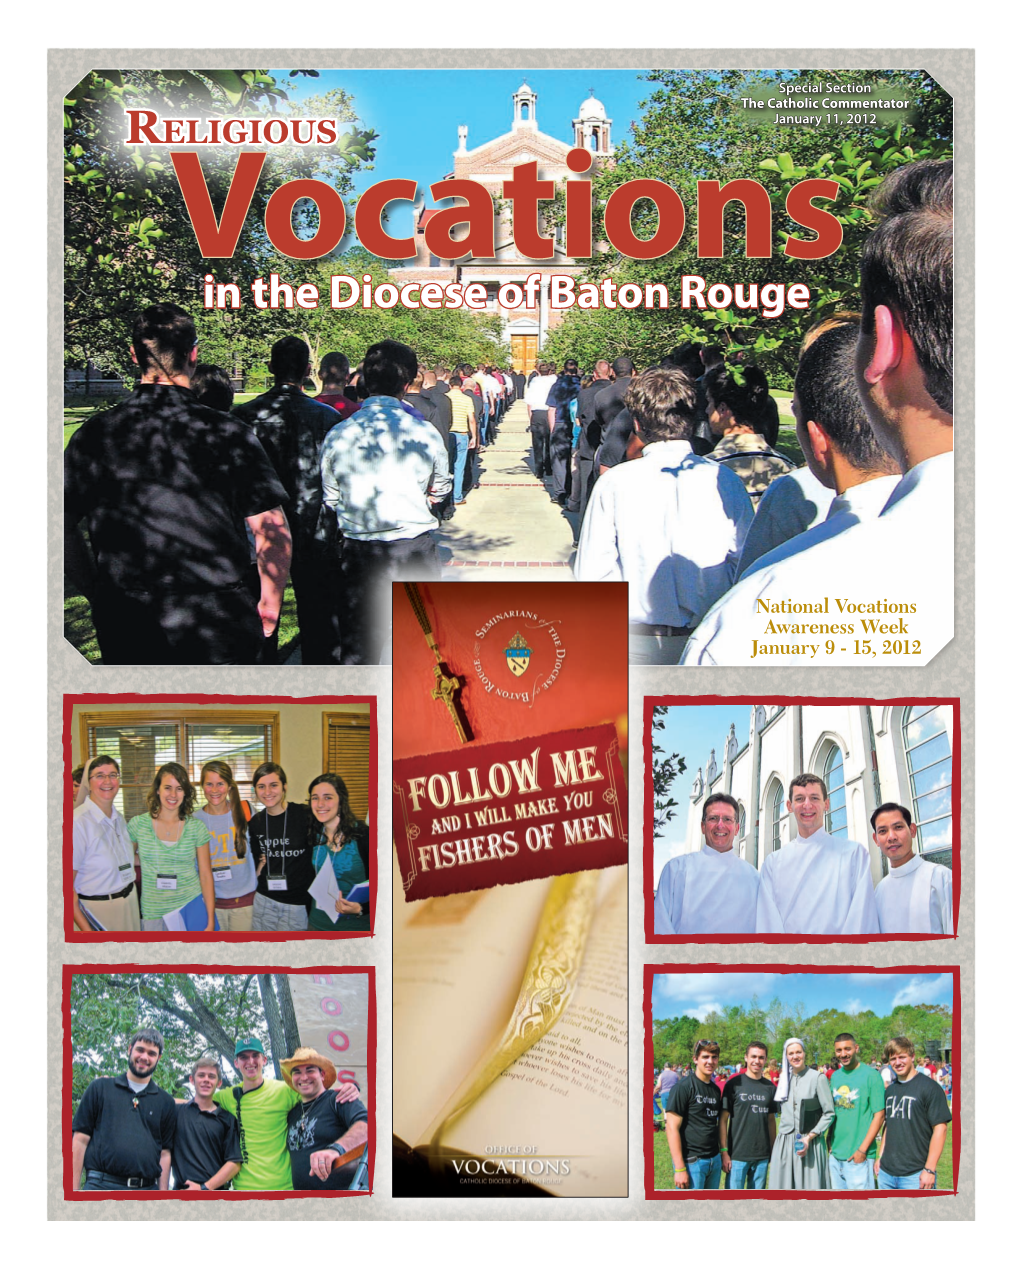 January 11, 2012 Religious Vocations in the Diocese of Baton Rouge